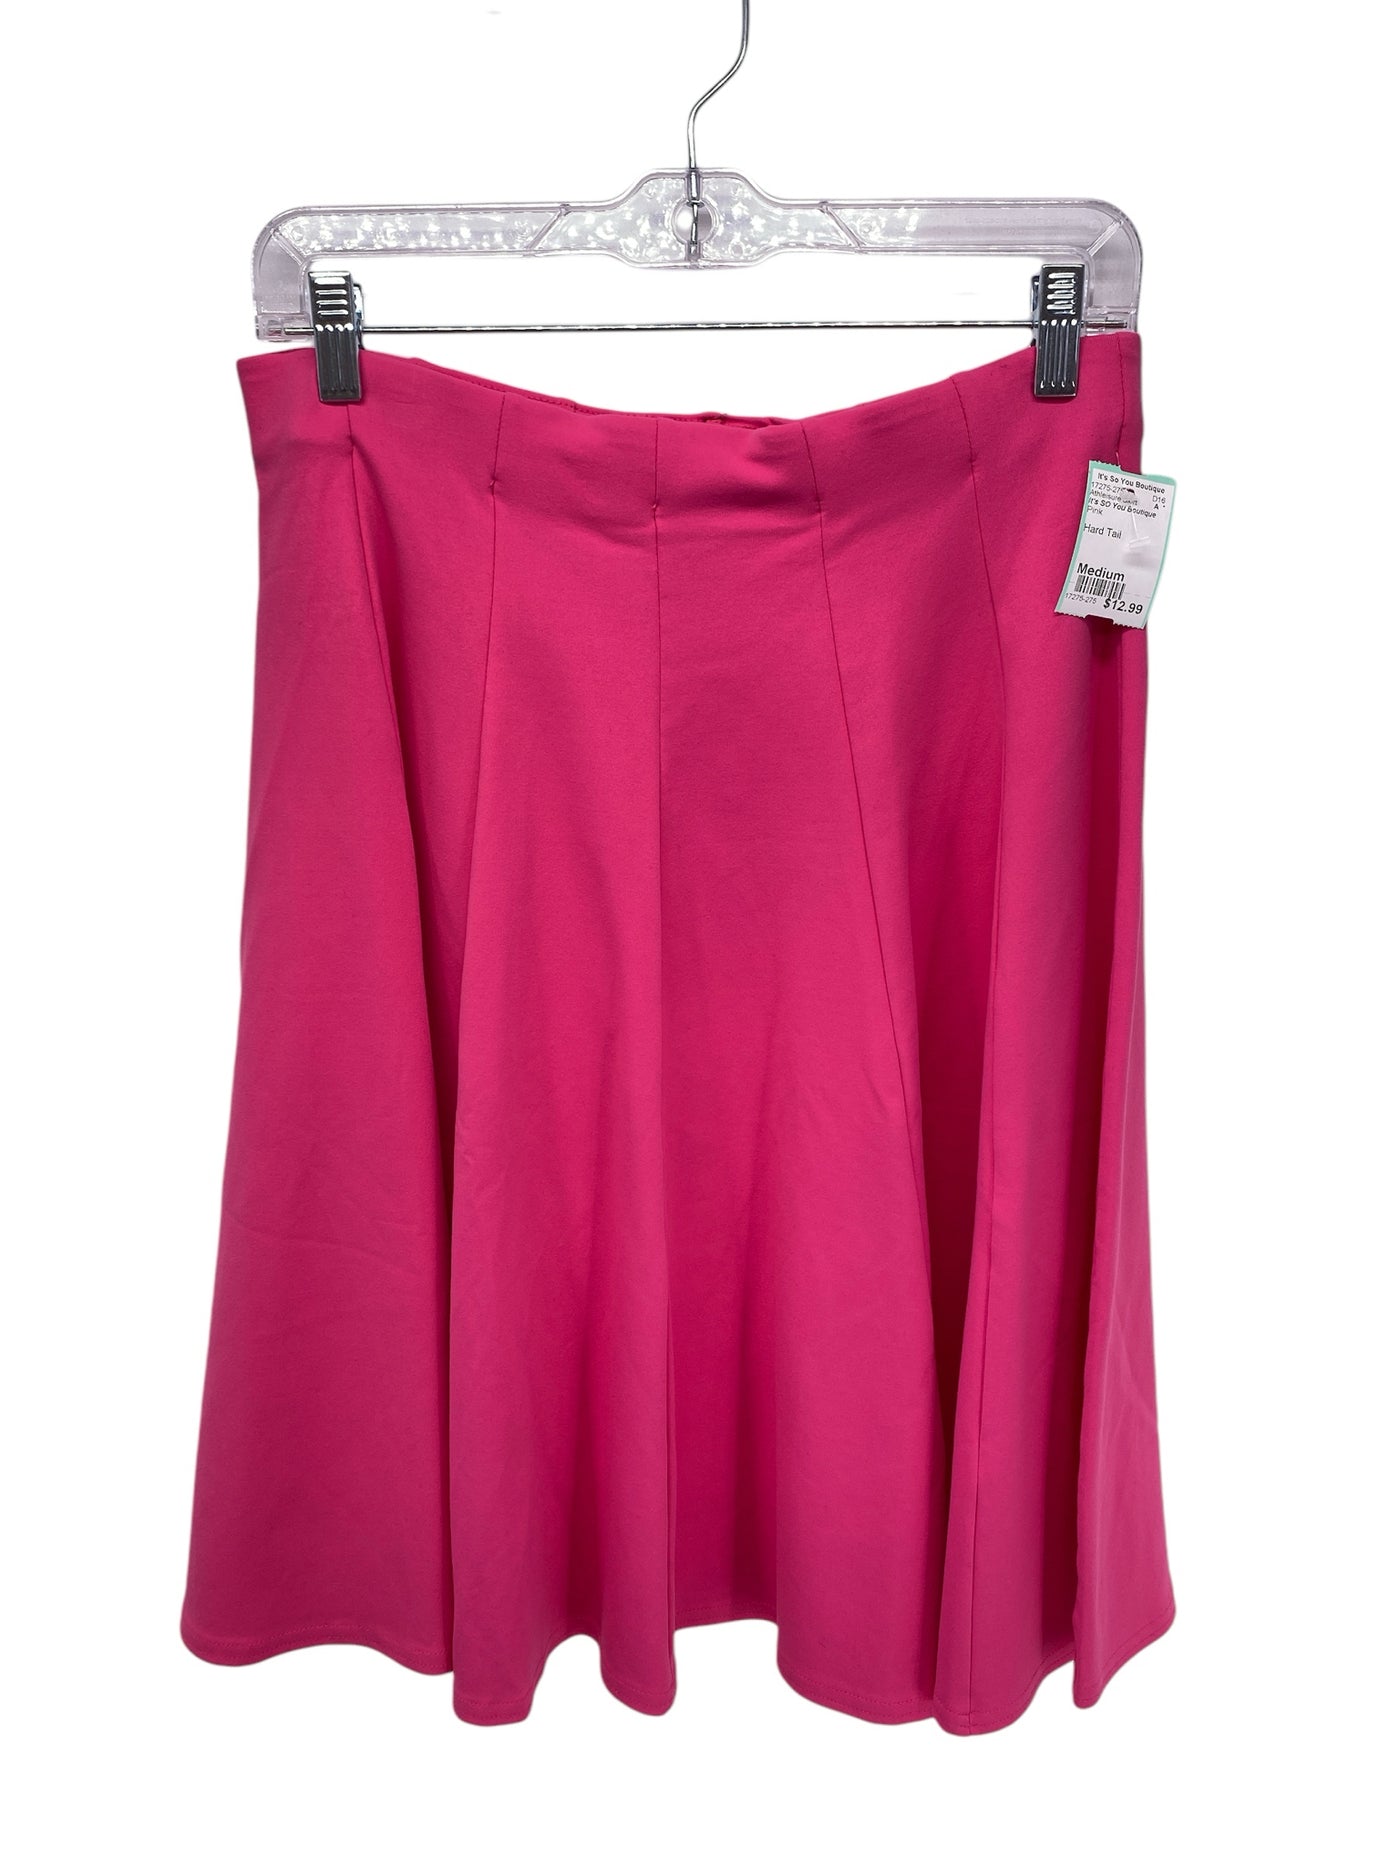 It's SO You Boutique Misses Size Medium Pink Athleisure Skirt